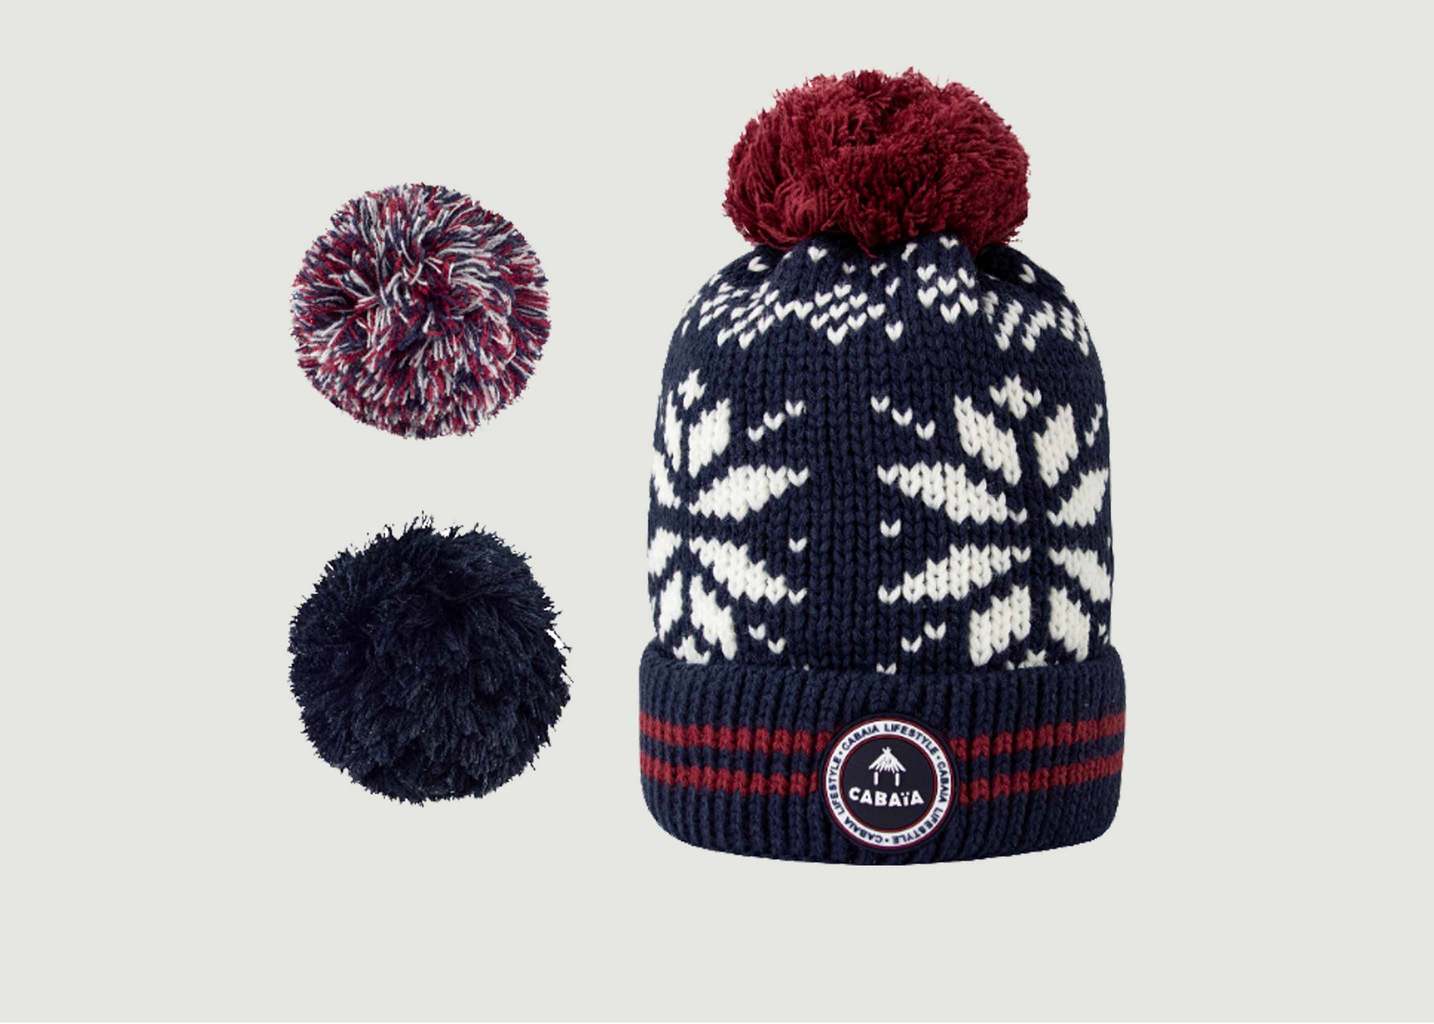 Perroquet Fleece Lined Beanie With 3 Pompons - Cabaïa